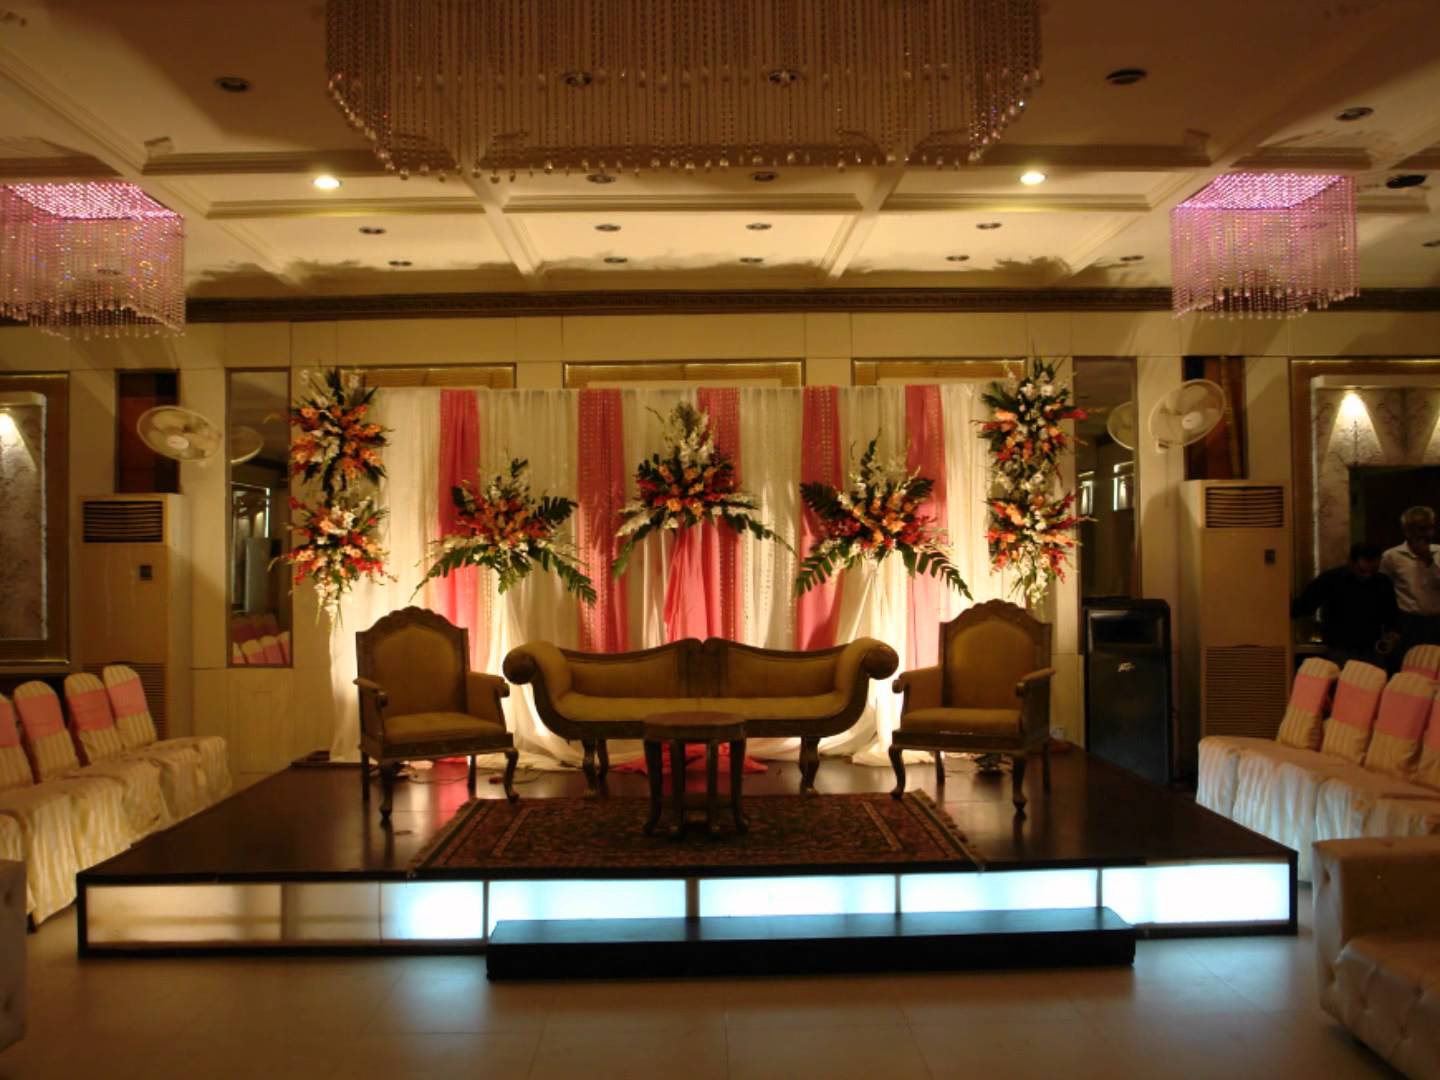 Gourmet Banquet Hall Lahore Rates Marquee Per Head Charges Menu Booking